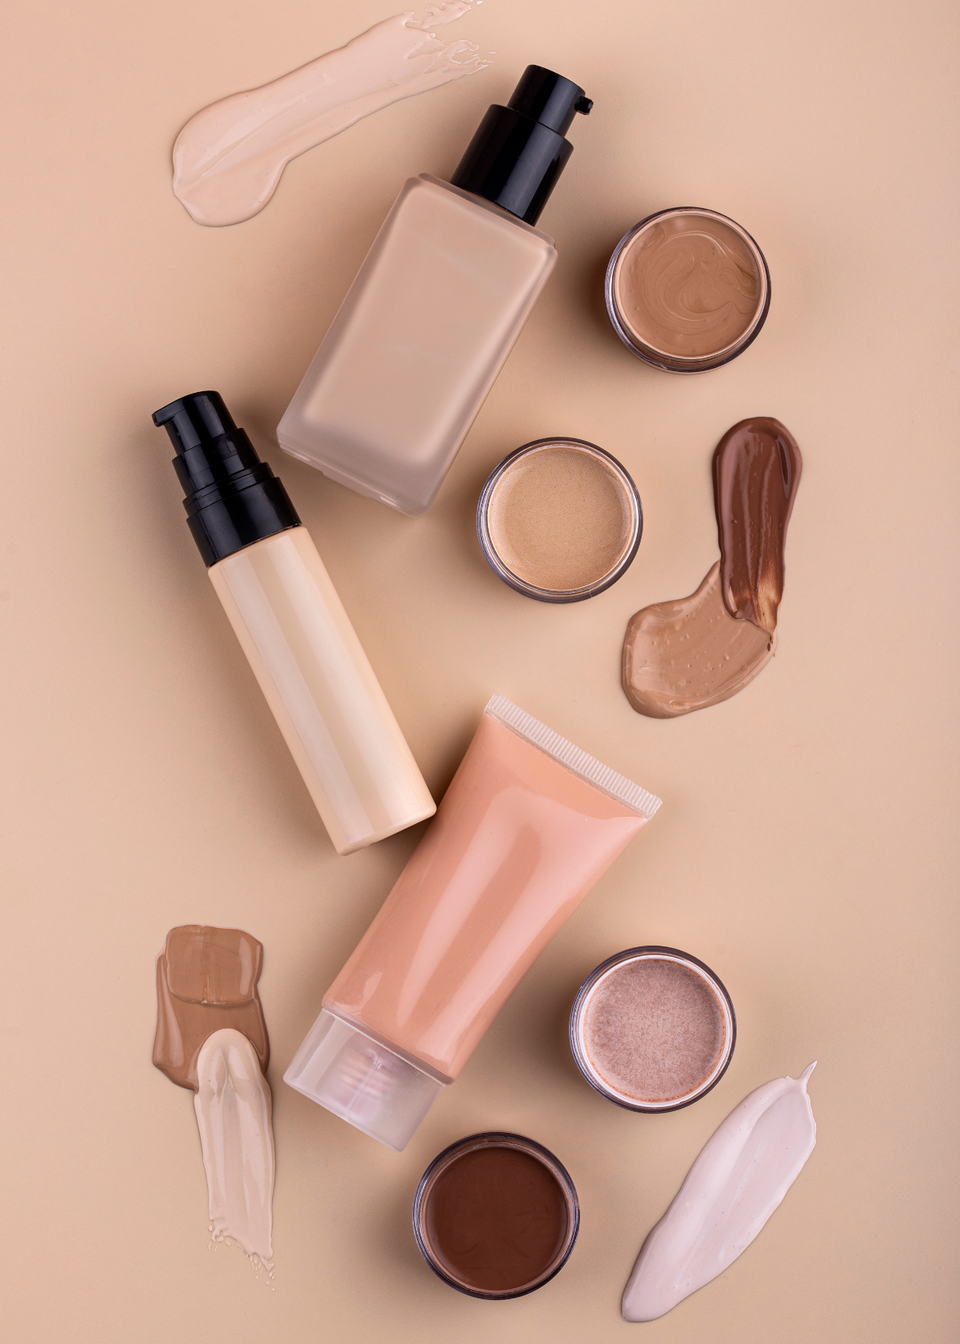 5 Best Foundation For Acne Prone Skin